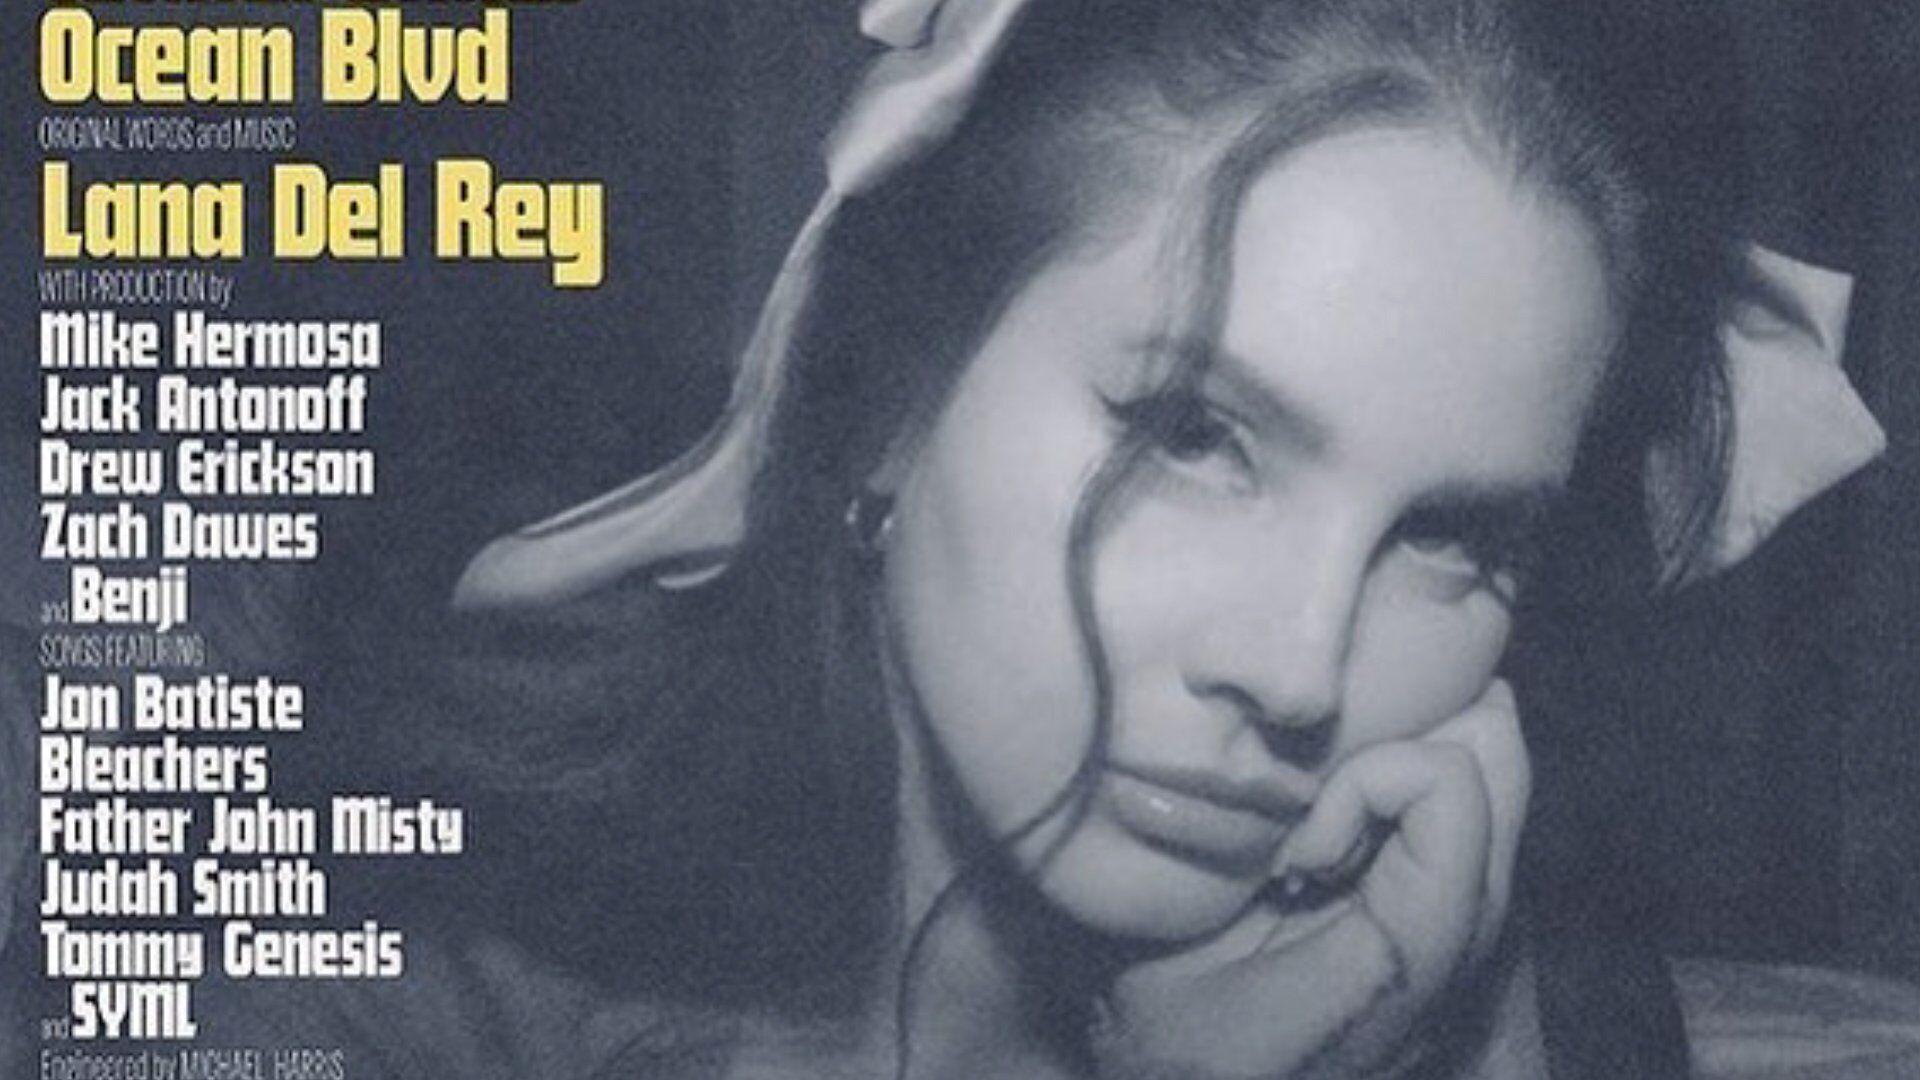 Lana Del Rey announces ninth studio album and releases new song